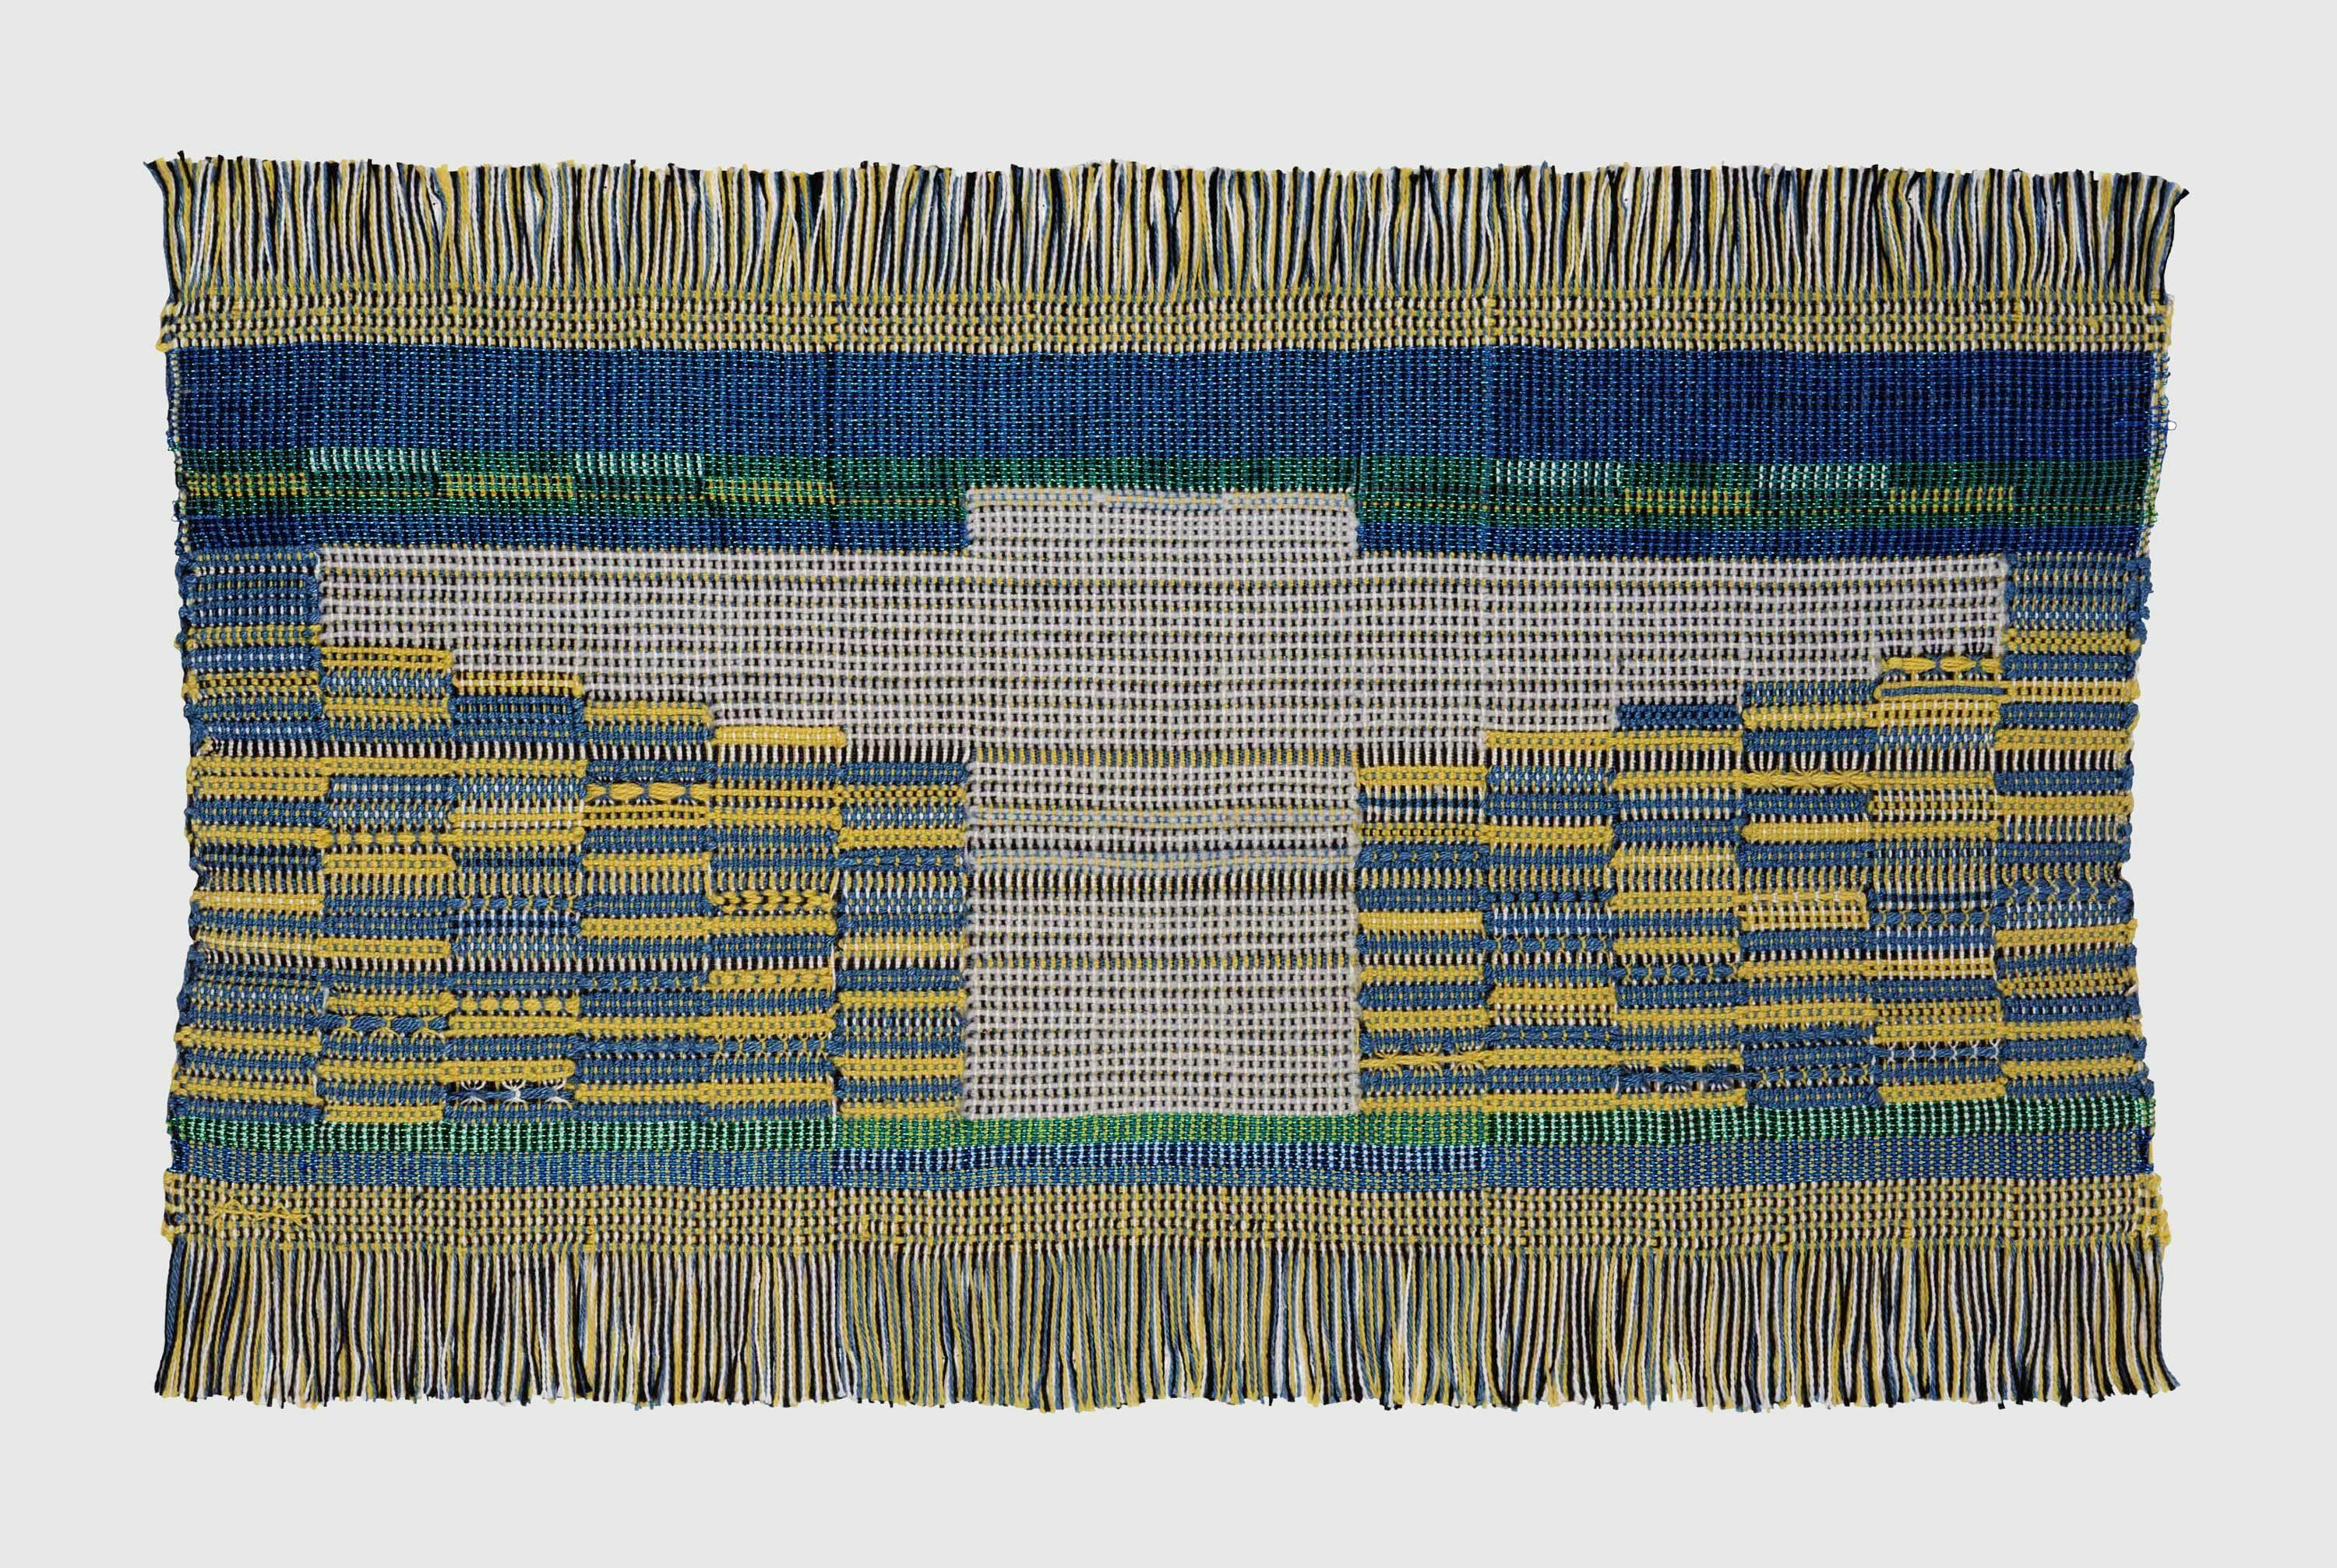 A textile by Anni Albers, titled Sheep May Safely Graze, dated 1958.